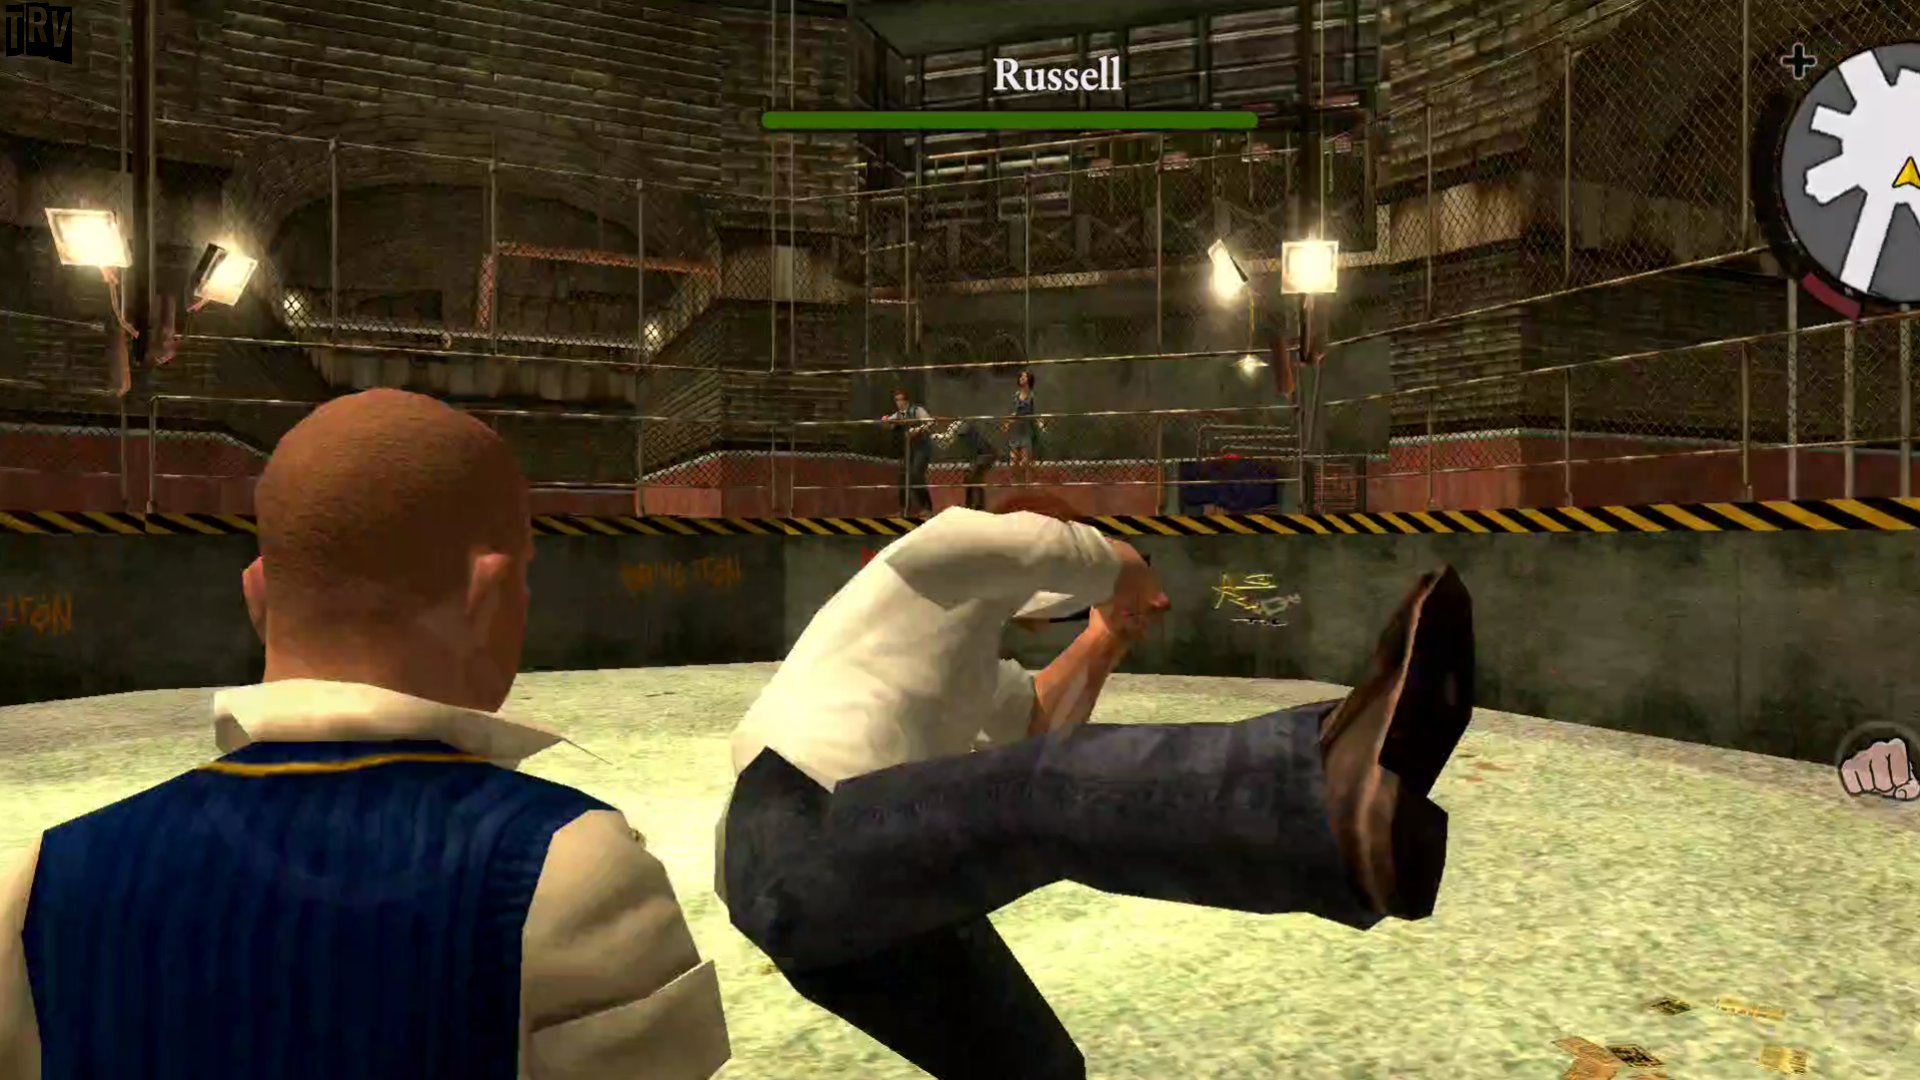 Bully Anniversary edition - game screenshot #38 by vini7774 on